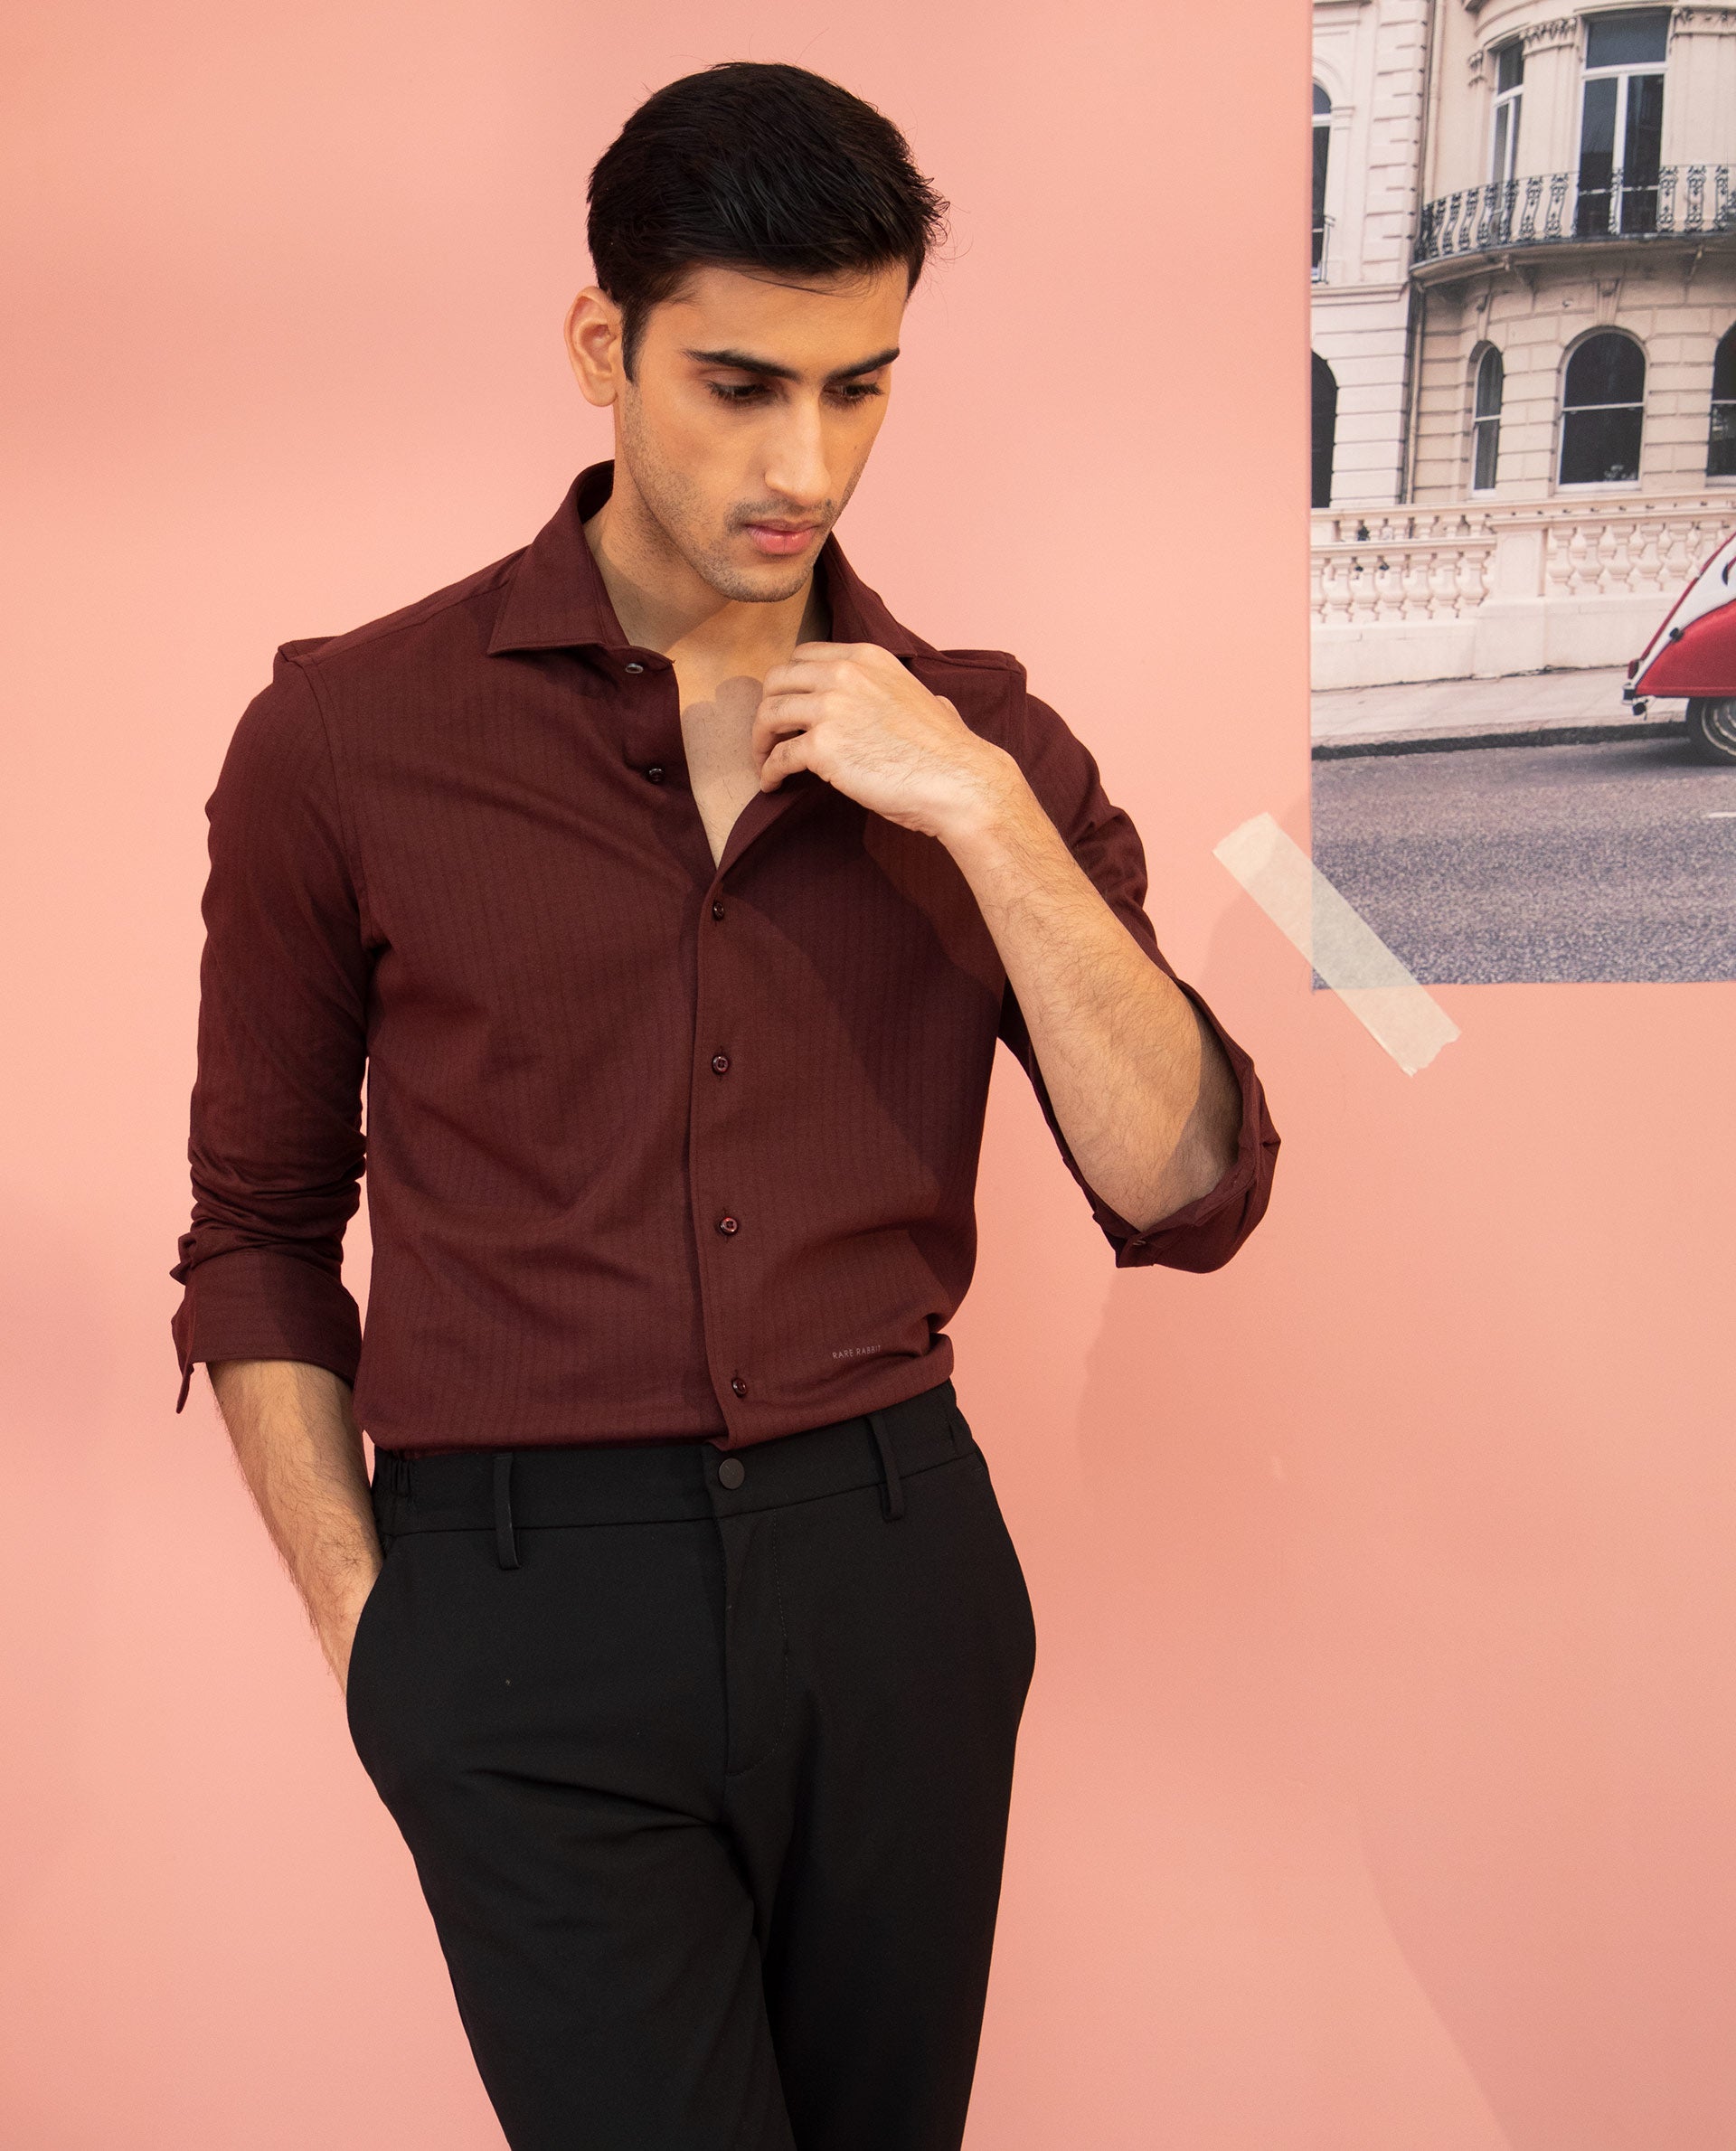 Downstring Trousers And Black Shirt Outfit  Best Fashion Blog For Men   TheUnstitchdcom